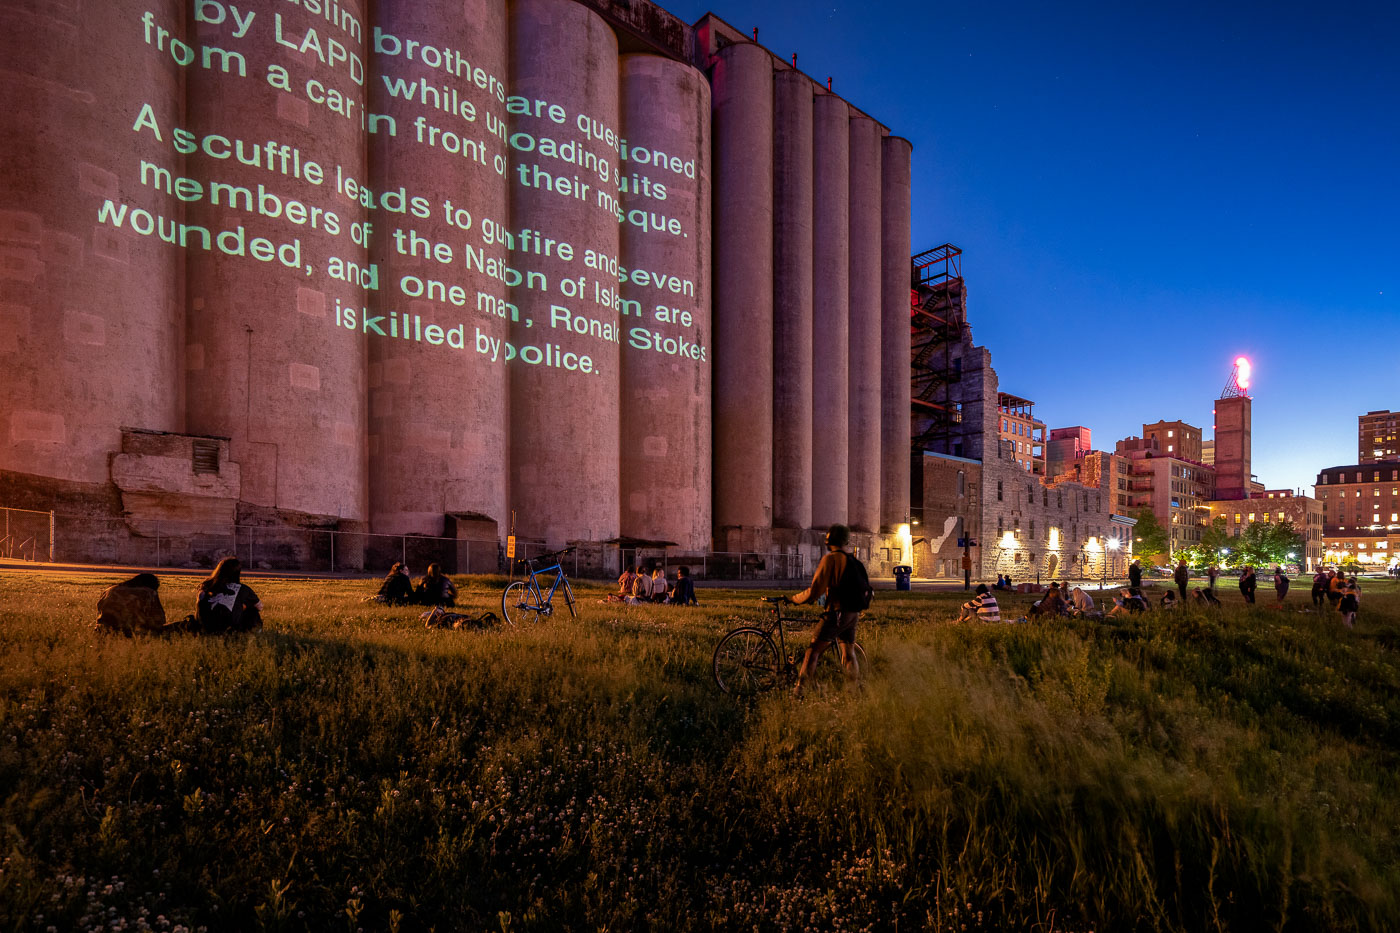 Revolution will be televised projected on grain elevator